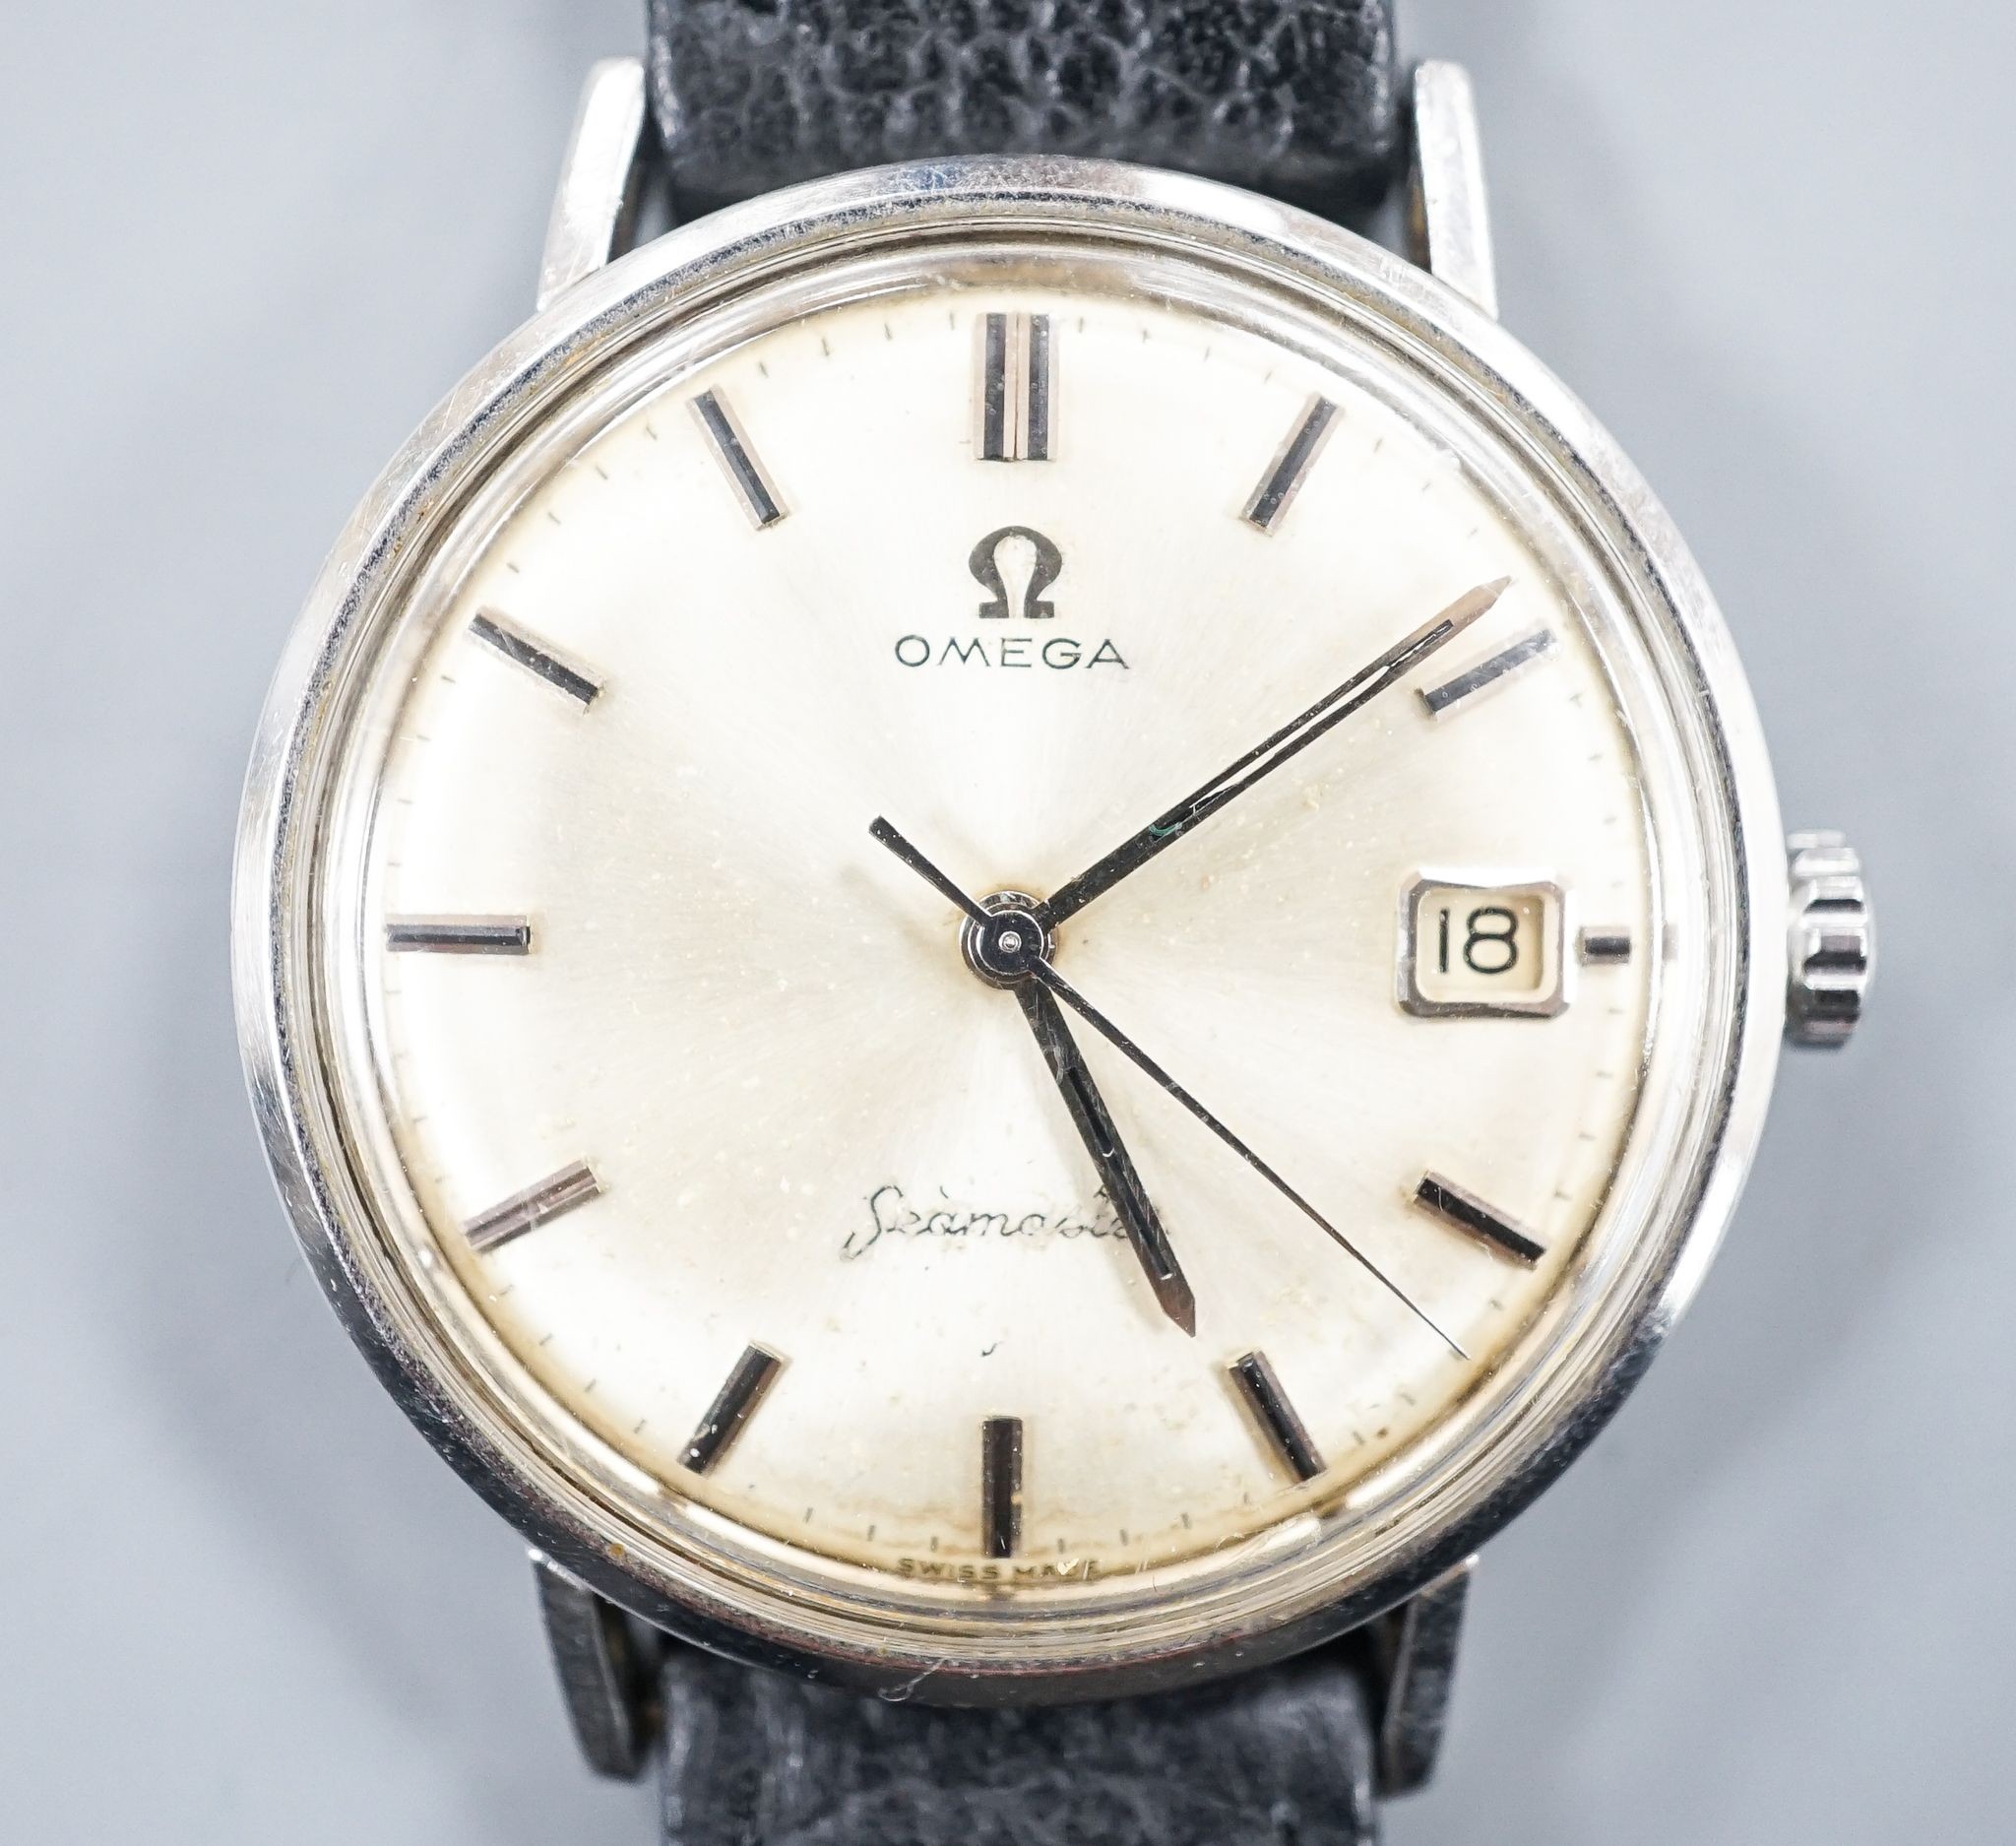 A gentleman's stainless steel Omega Seamaster manual wind wrist watch, on associated black leather strap, case diameter 35mm.